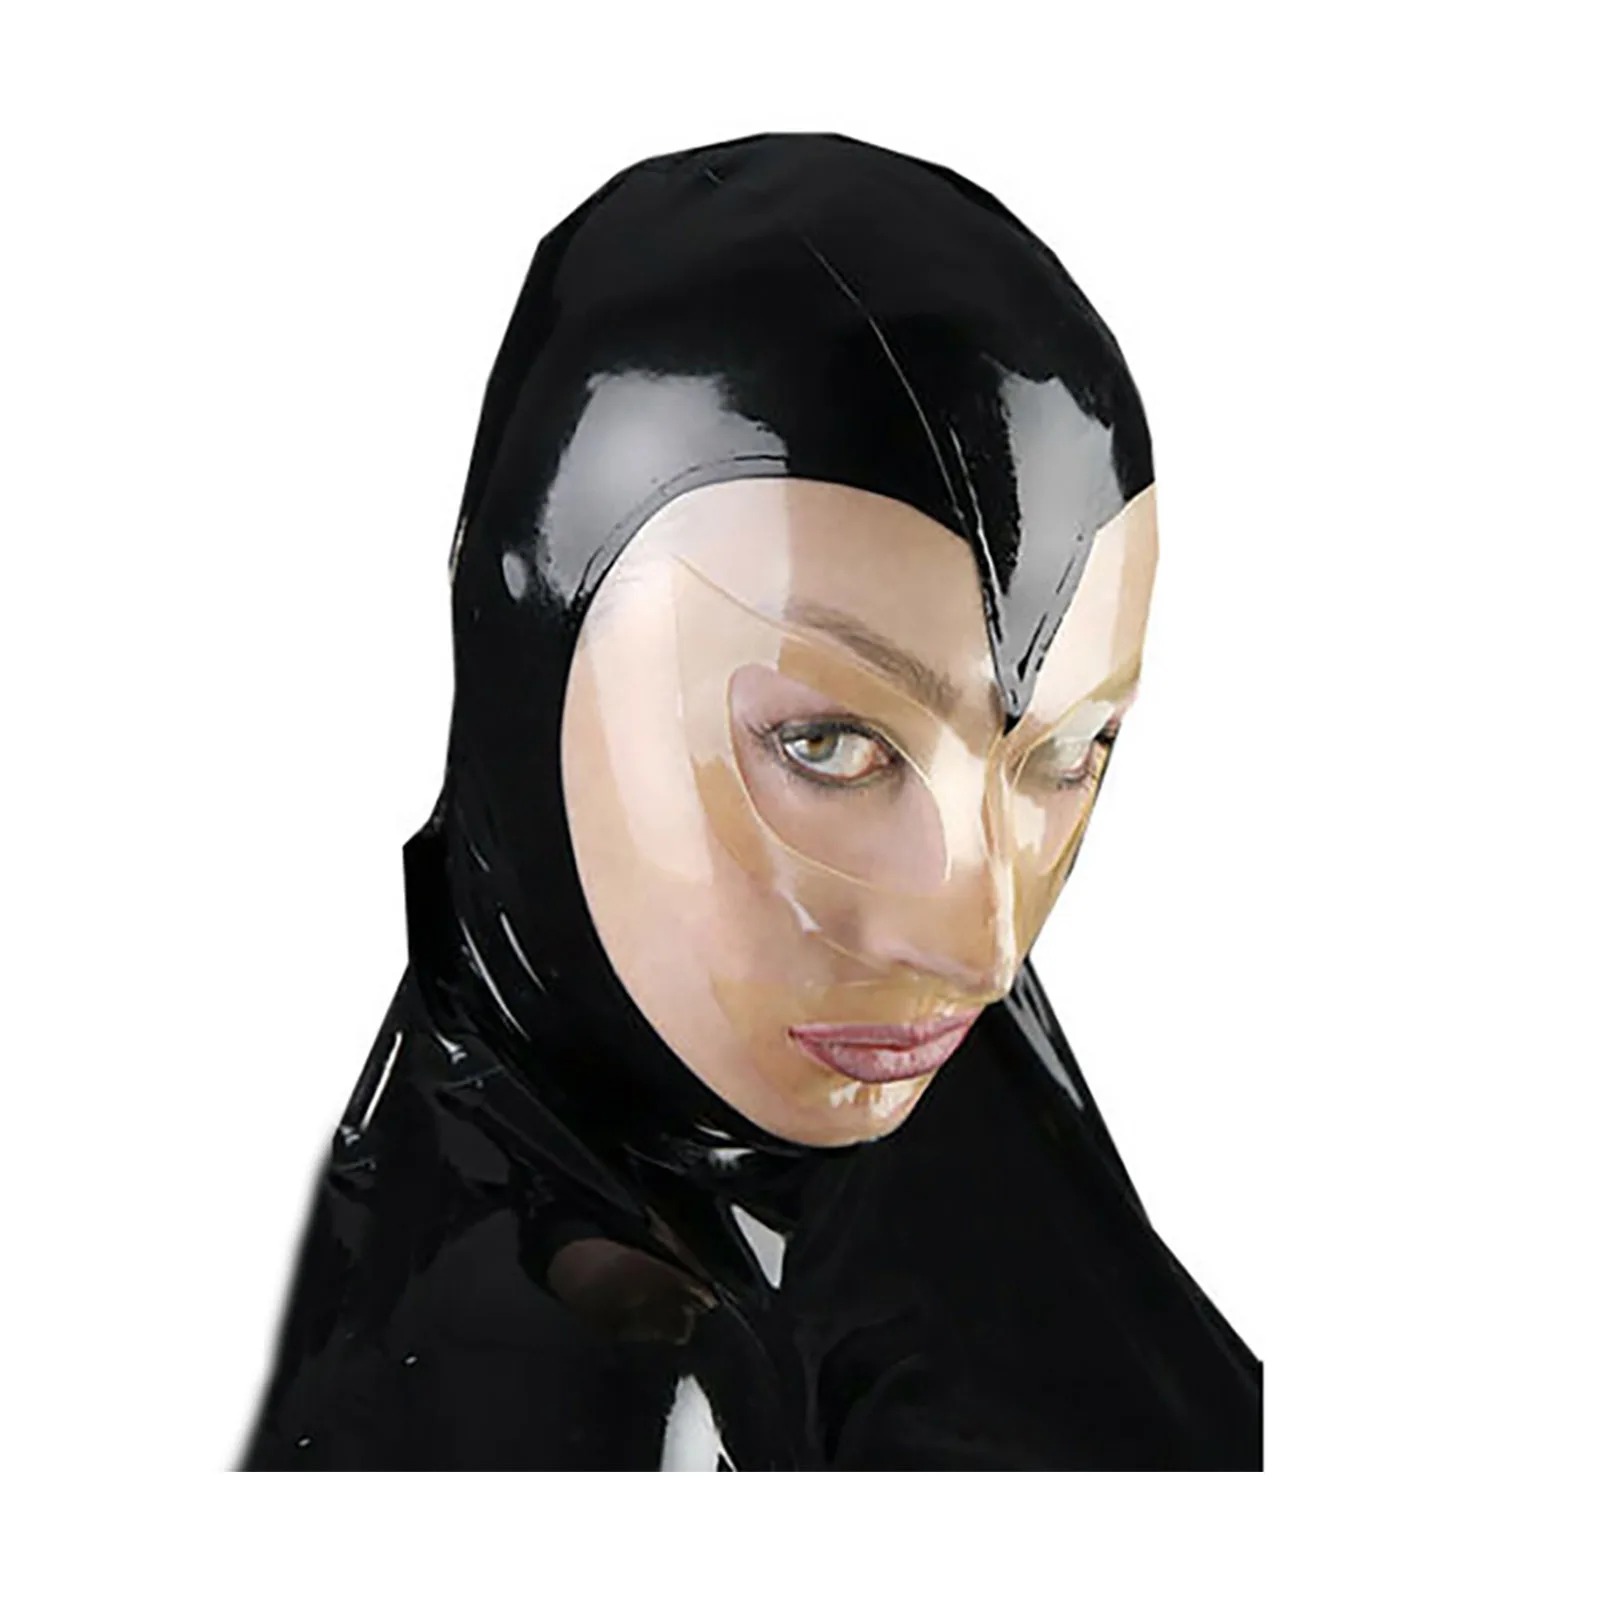 MONNIK Latex Mask Rubber Fashion Hood Two Color Open Eyes&Mouth with Rear Zipper Handmade for Unisex Bodysuit Cosplay Party ogkb customized zip men hooded jumpsuits for women 3d printing unisex loose zipper open sleepwear onesies diy bodysuit wholesale